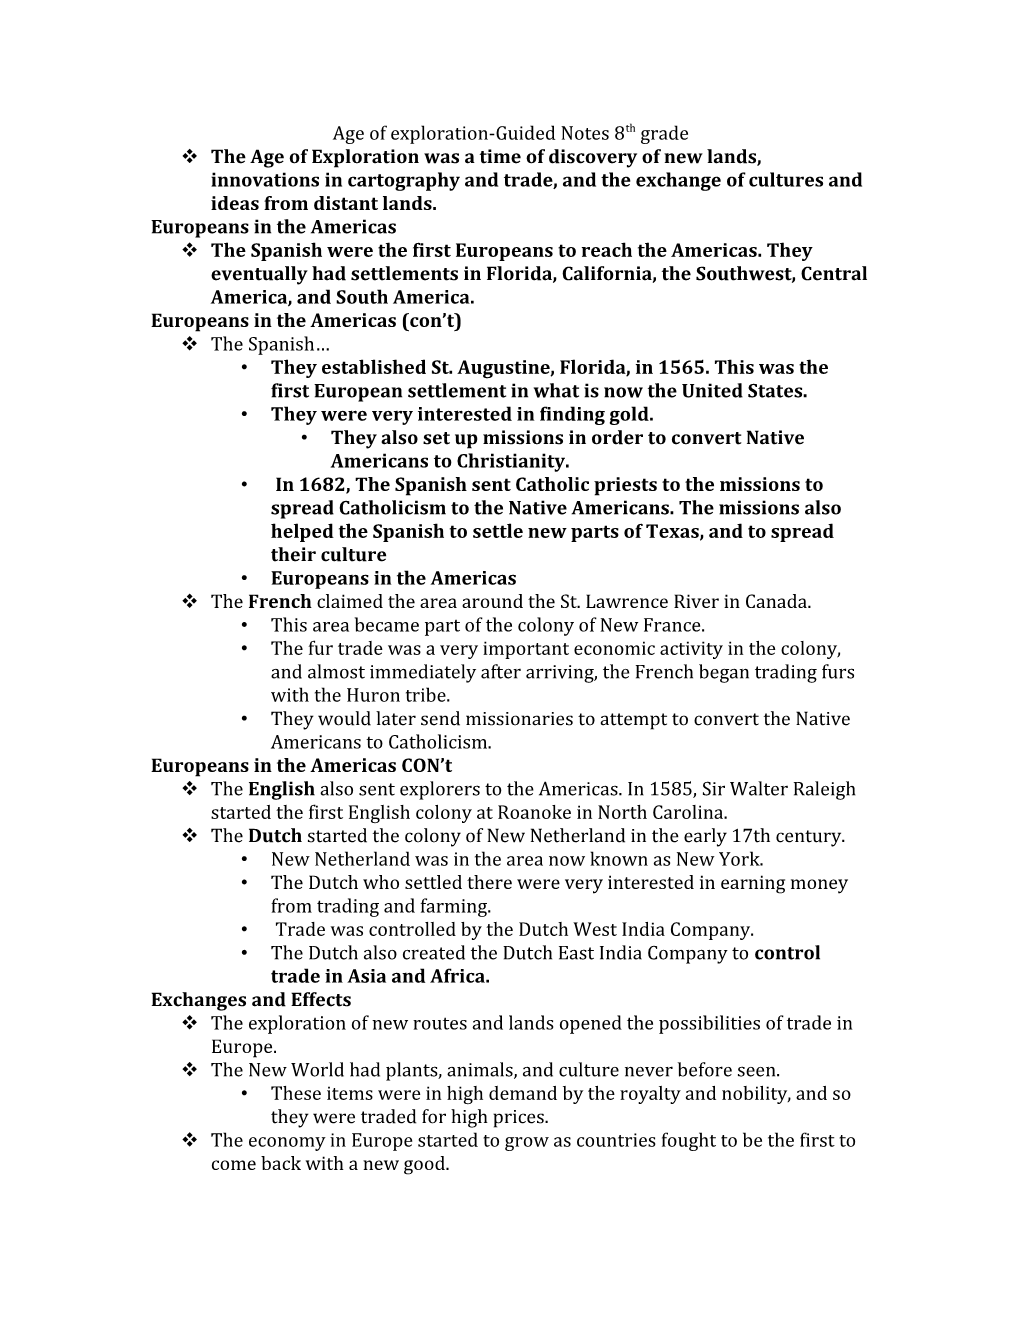 Age of Exploration-Guided Notes 8Th Grade